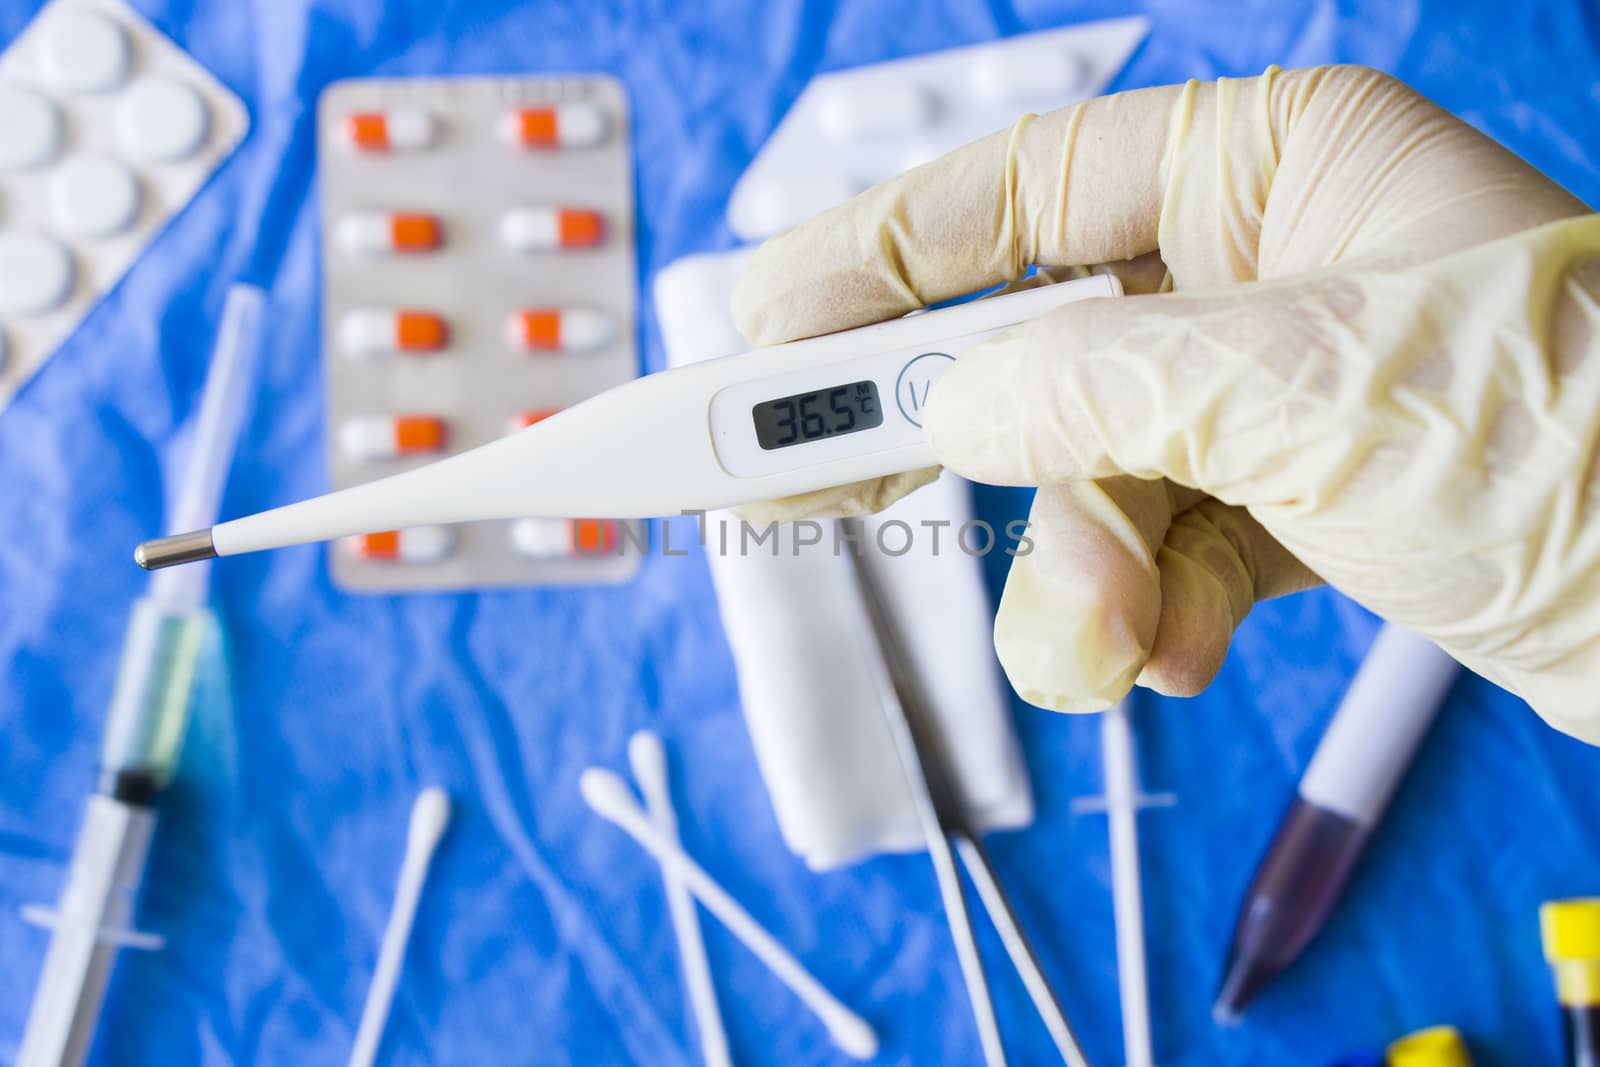 Body thermometer holding in hand, glove and doctors hand, drugs on the background